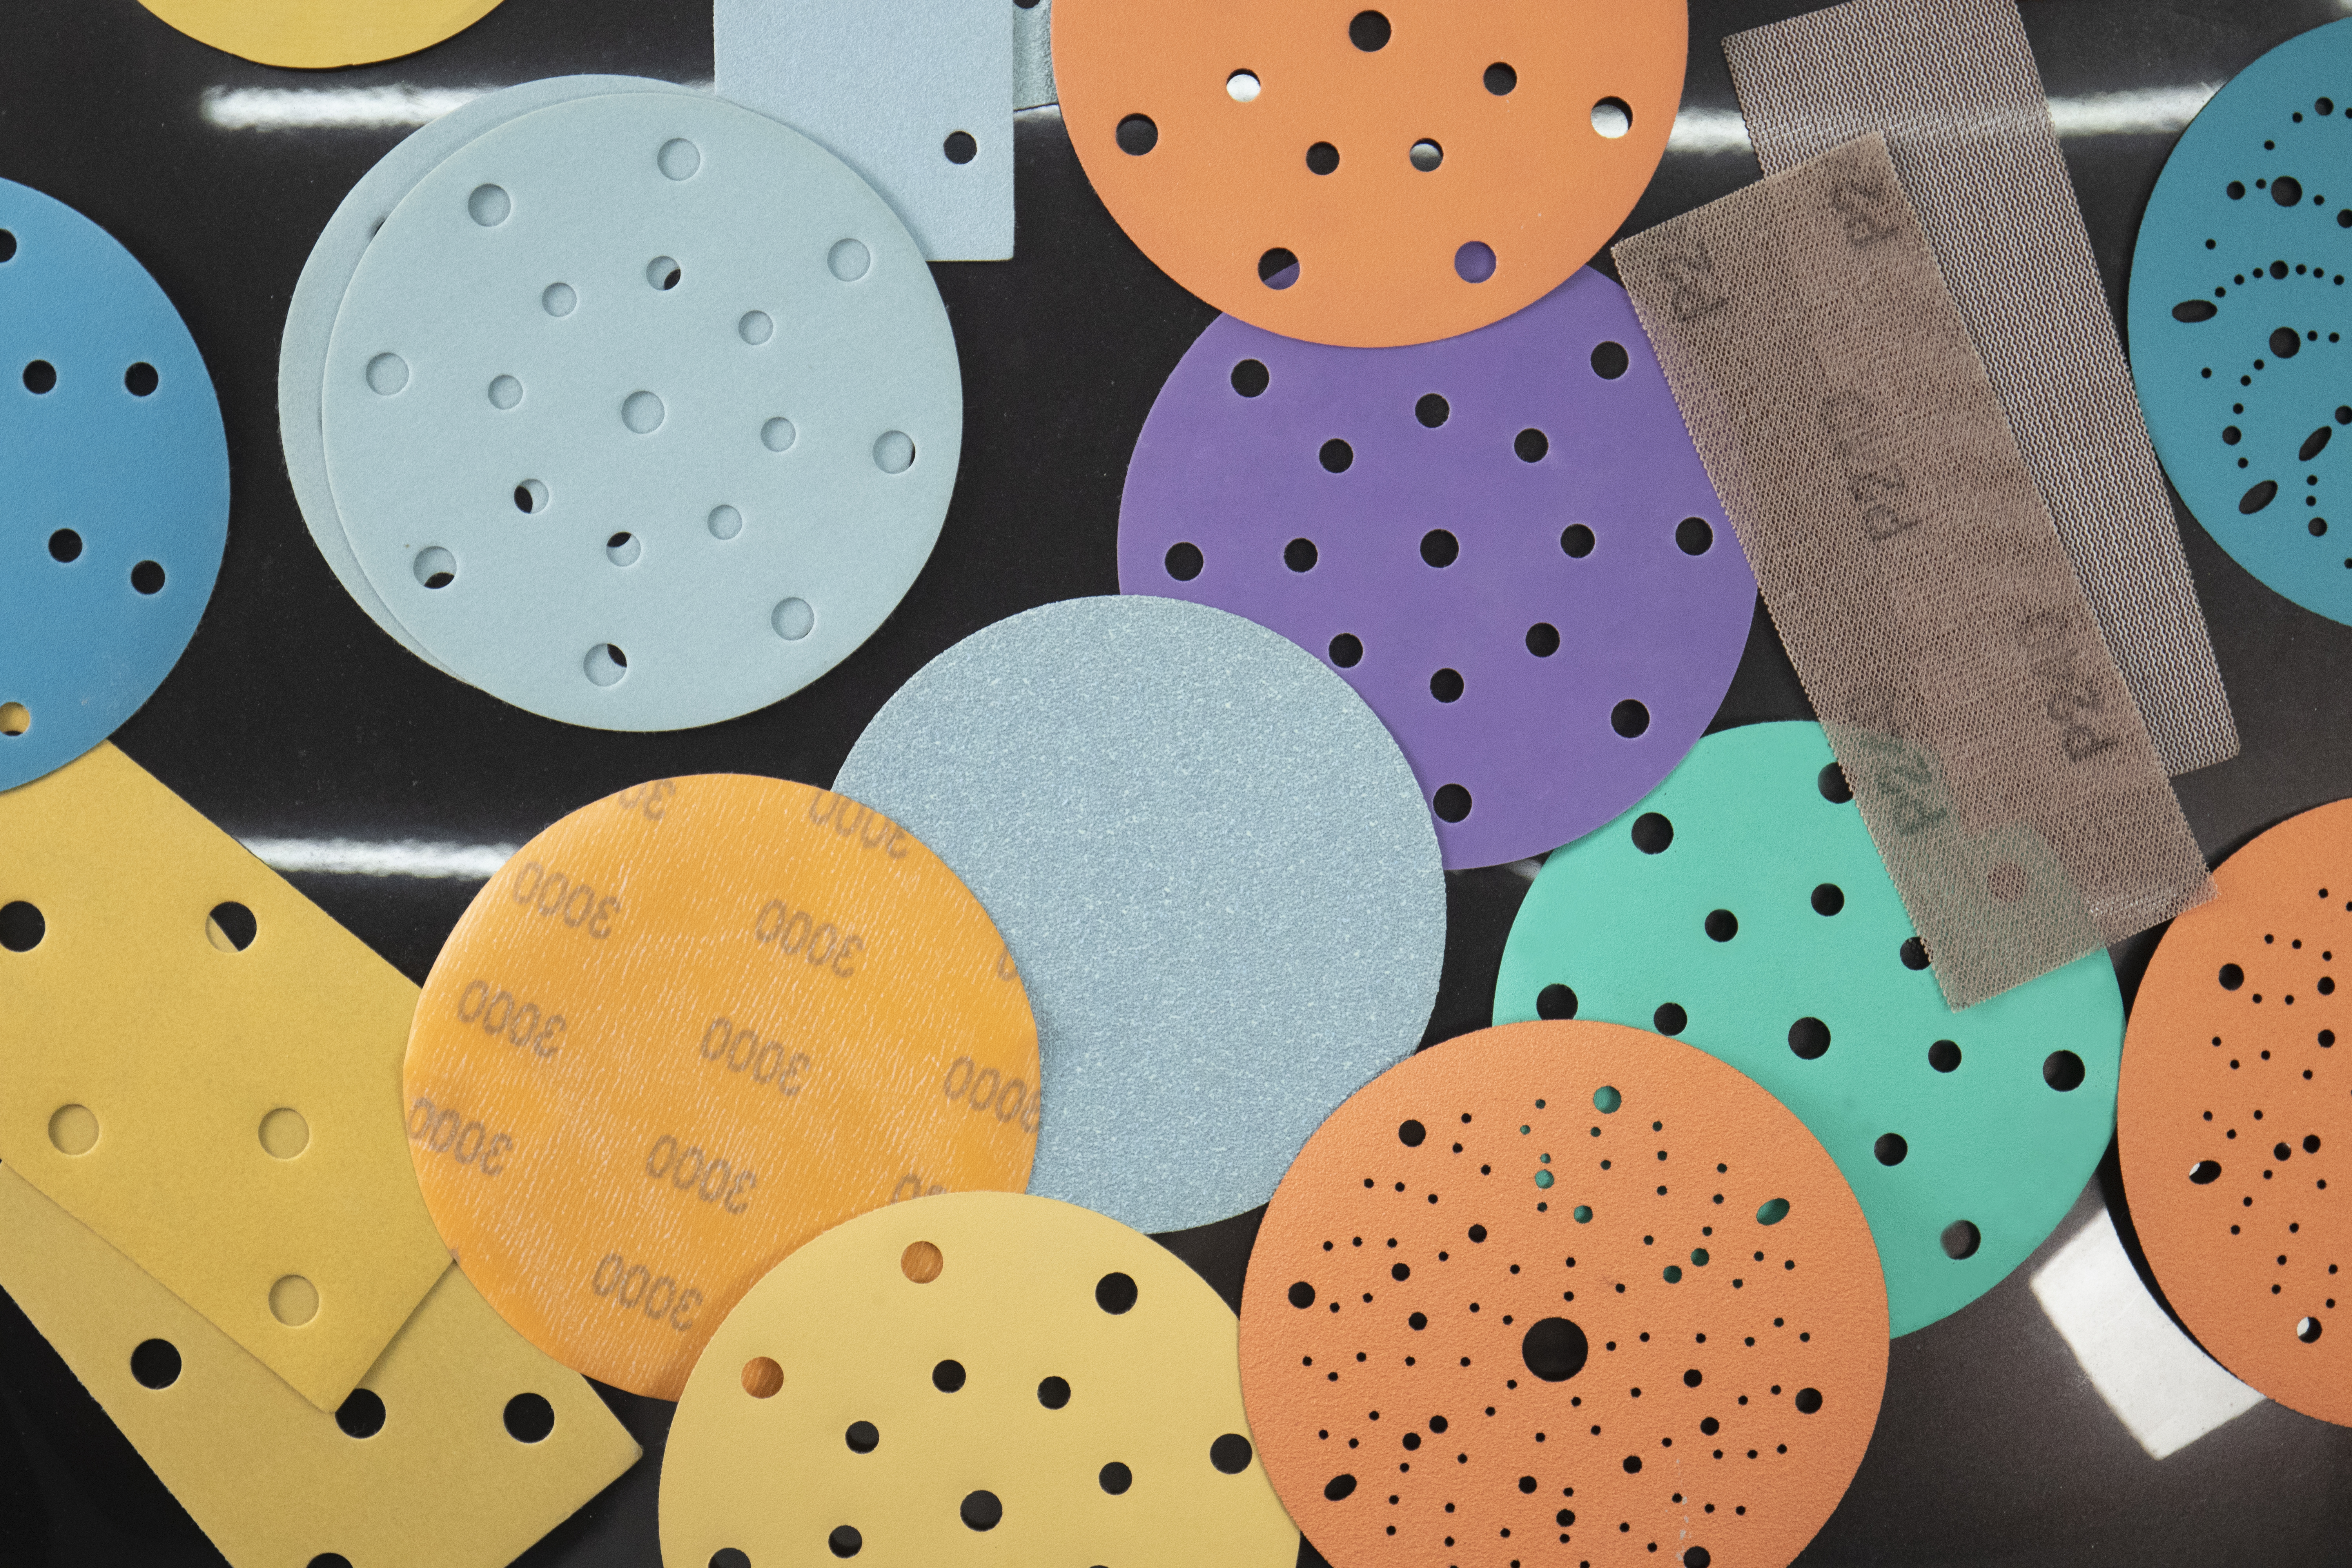 Sanding Discs with Holes and Without Holes